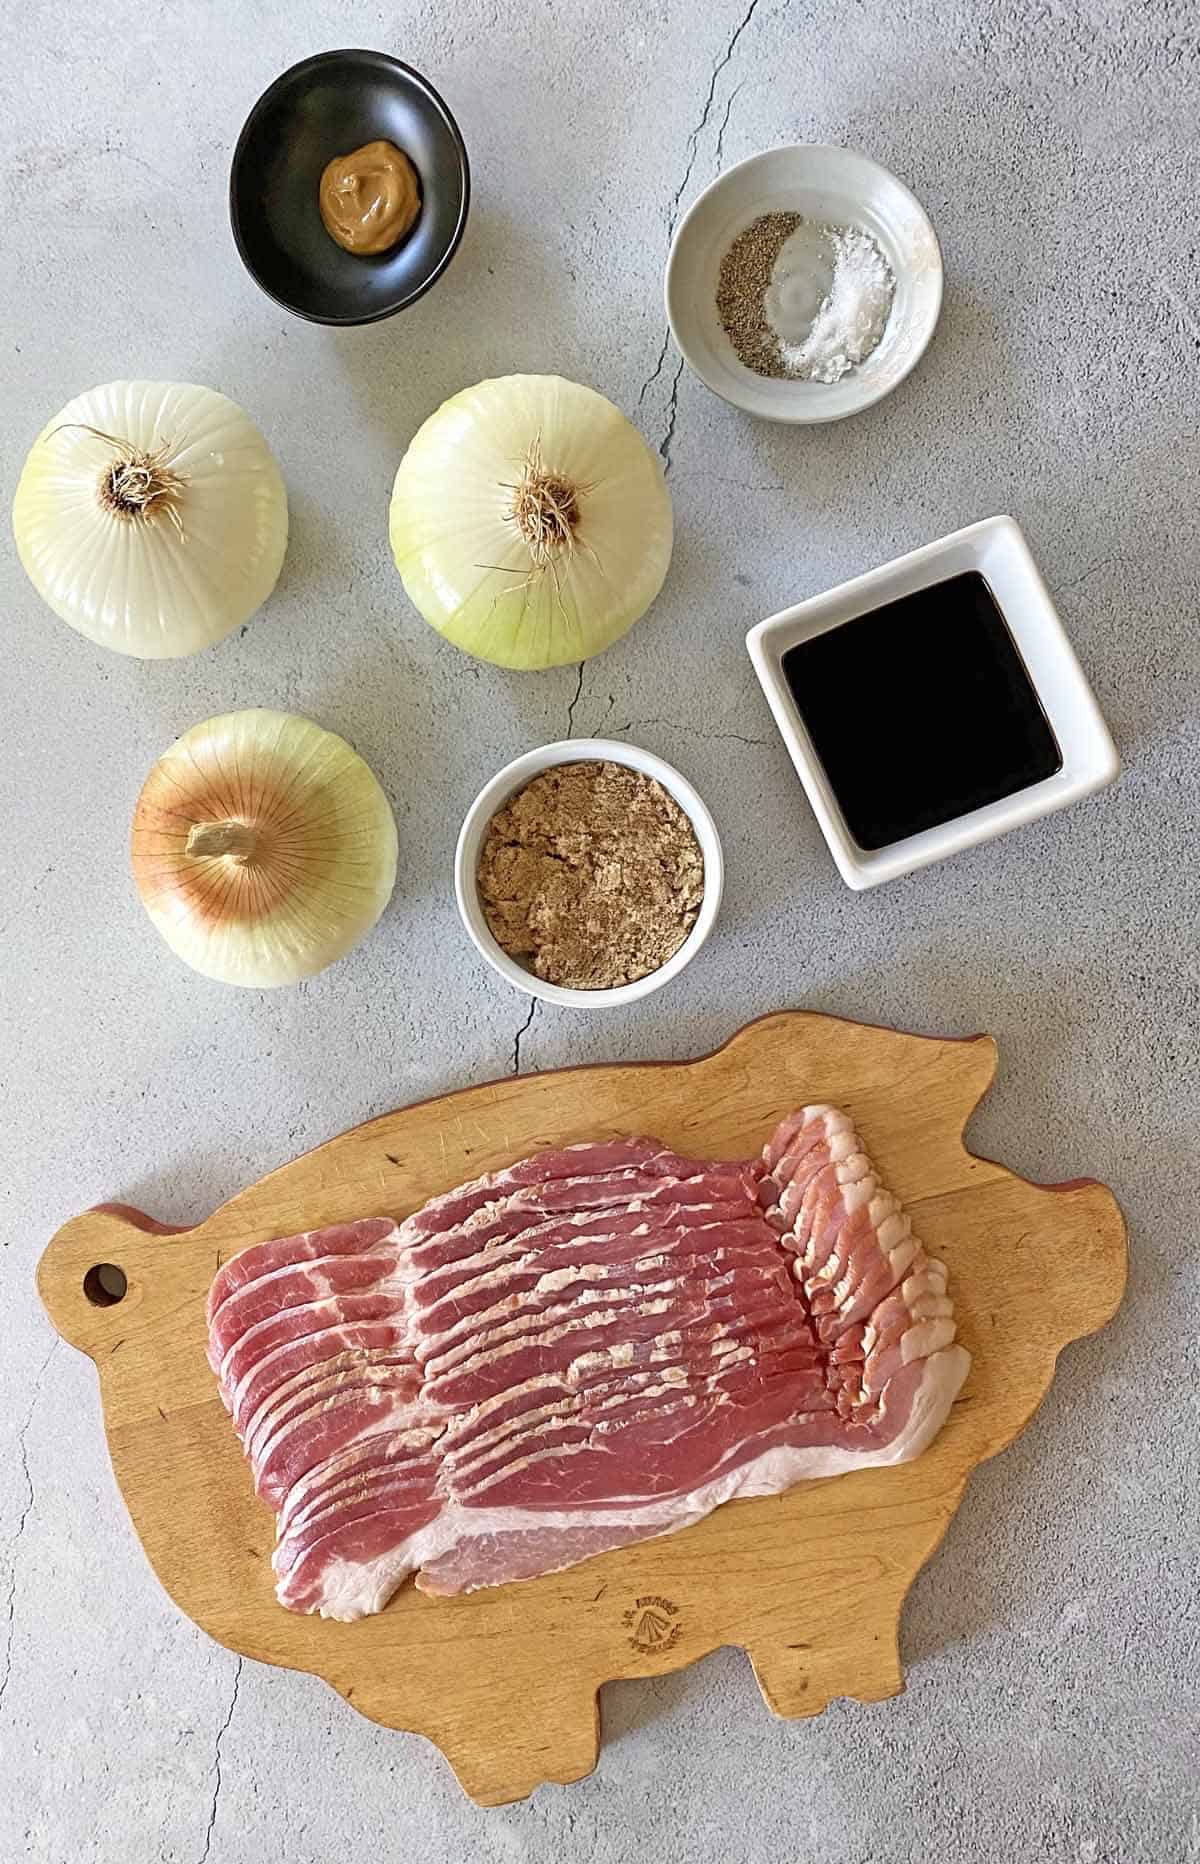 A dish with mustard, salt and pepper, 3 yellow onions, brown sugar, balsamic vinegar, and a pig-shaped cutting board with a pound of bacon.